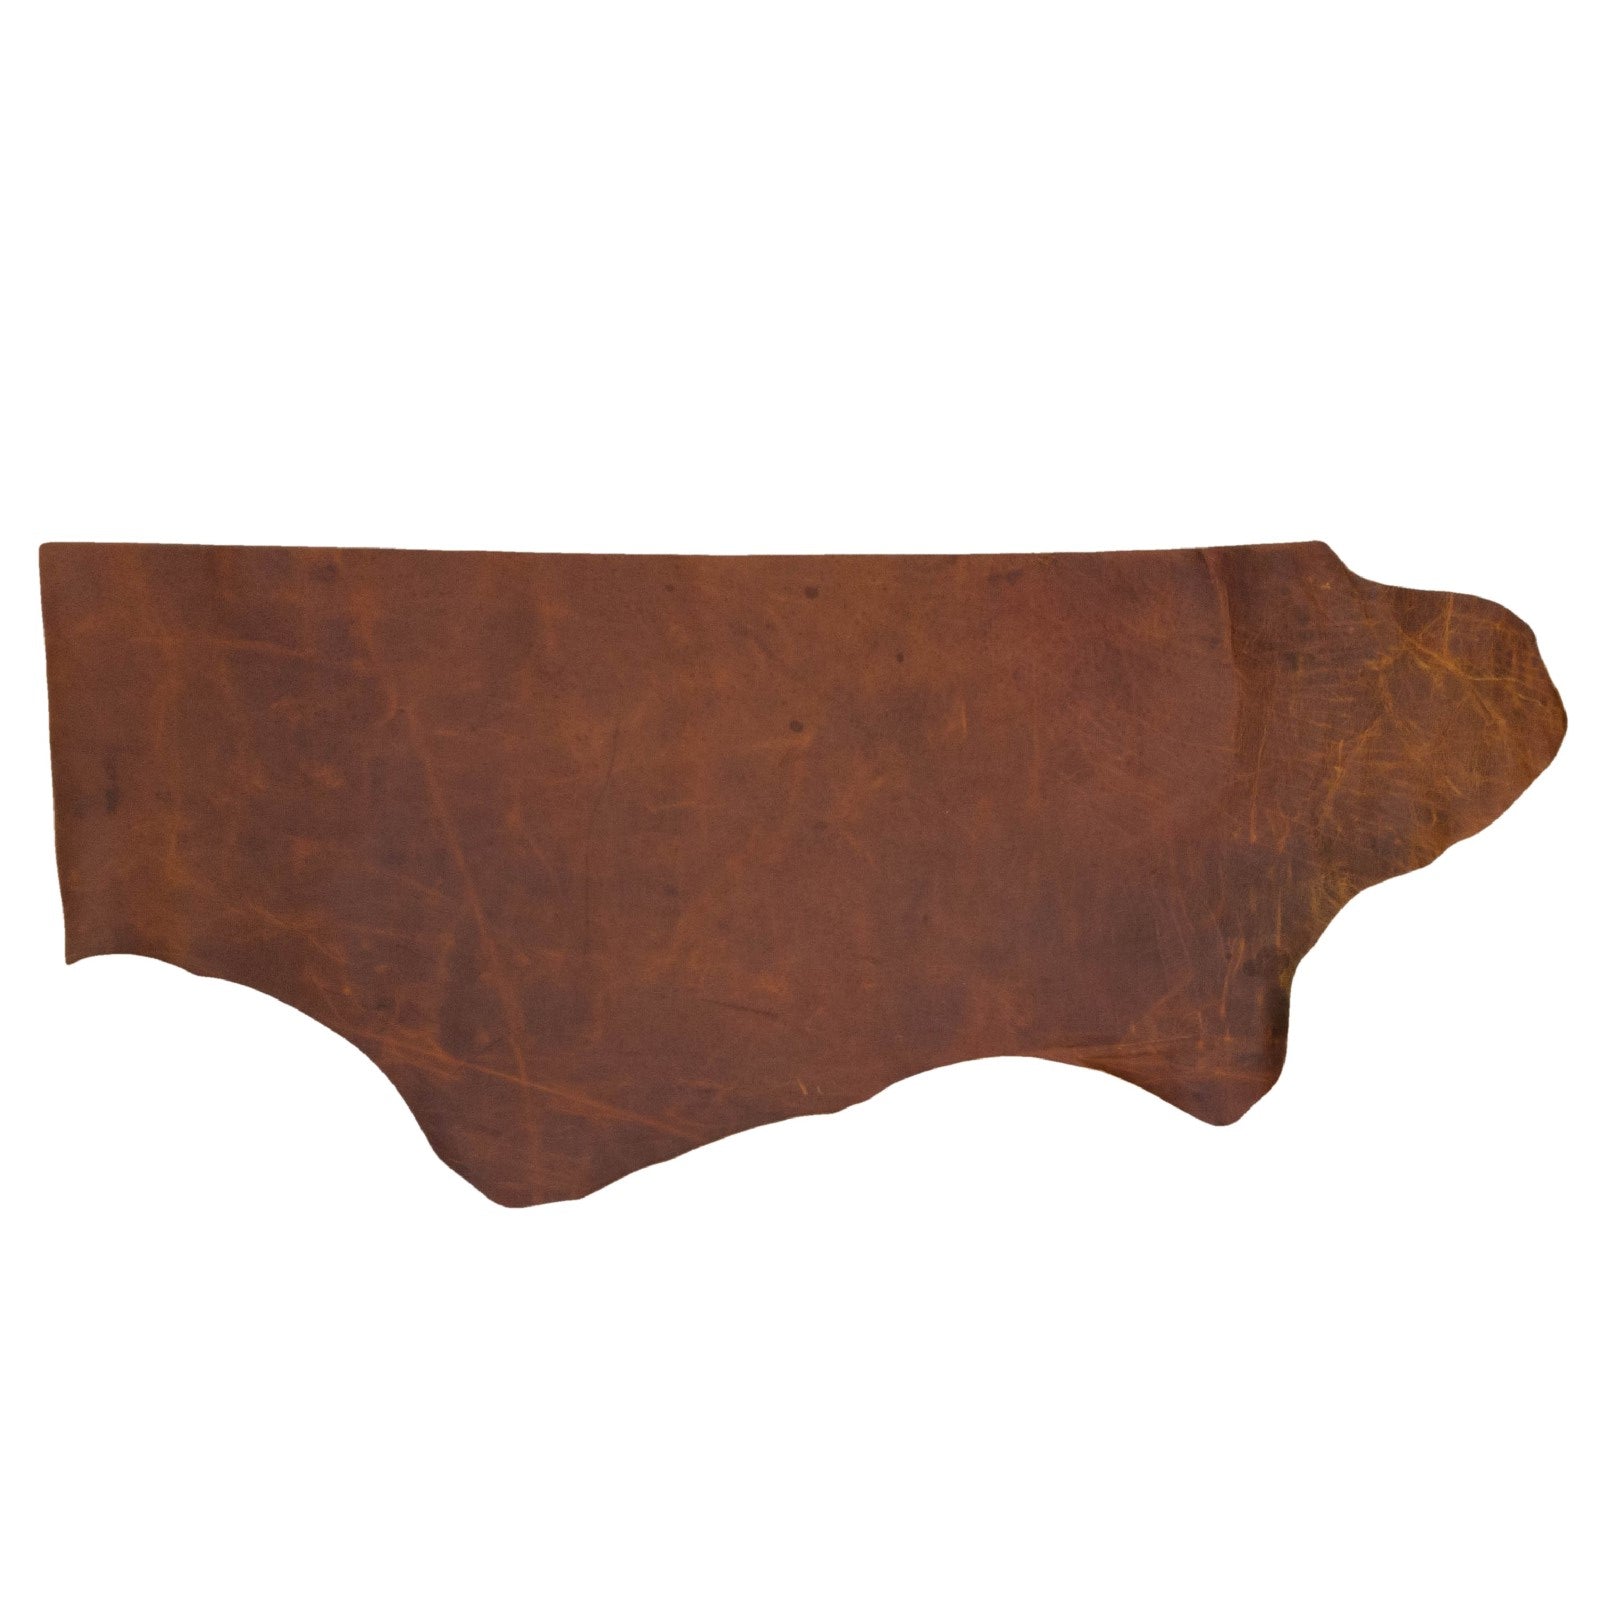 Sky Dance Orange, 6.5-32 SqFt, 2-3 oz, Pull up Sides & Pieces, Crazy Buffalo, Bottom Piece / 6.5-7.5 | The Leather Guy